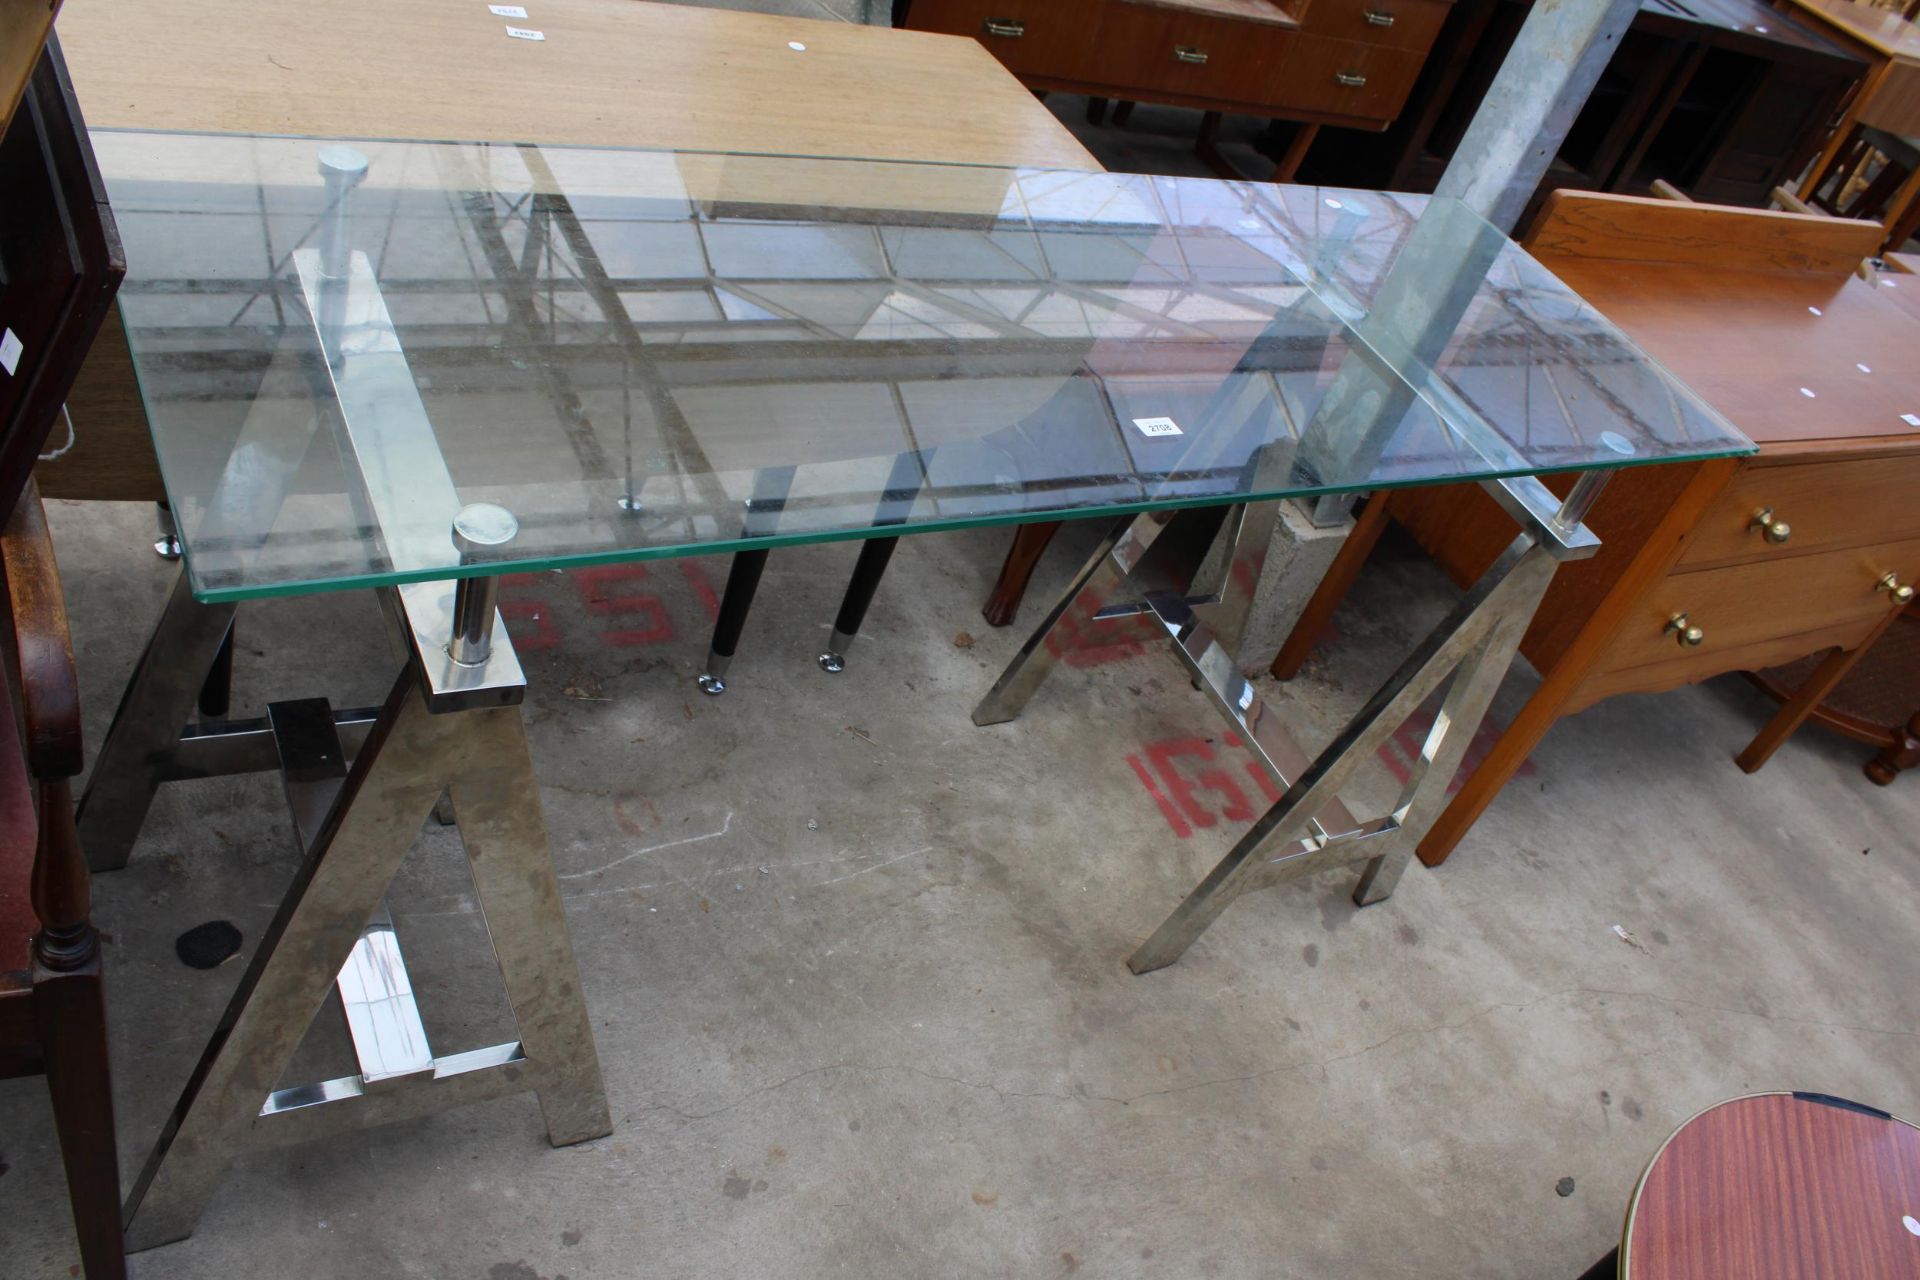 A RETRO CONSOLE TABLE WITH GLASS TOP ON POLISHED CHROME TRESTLE STYLE LEGS, 59" X 20"